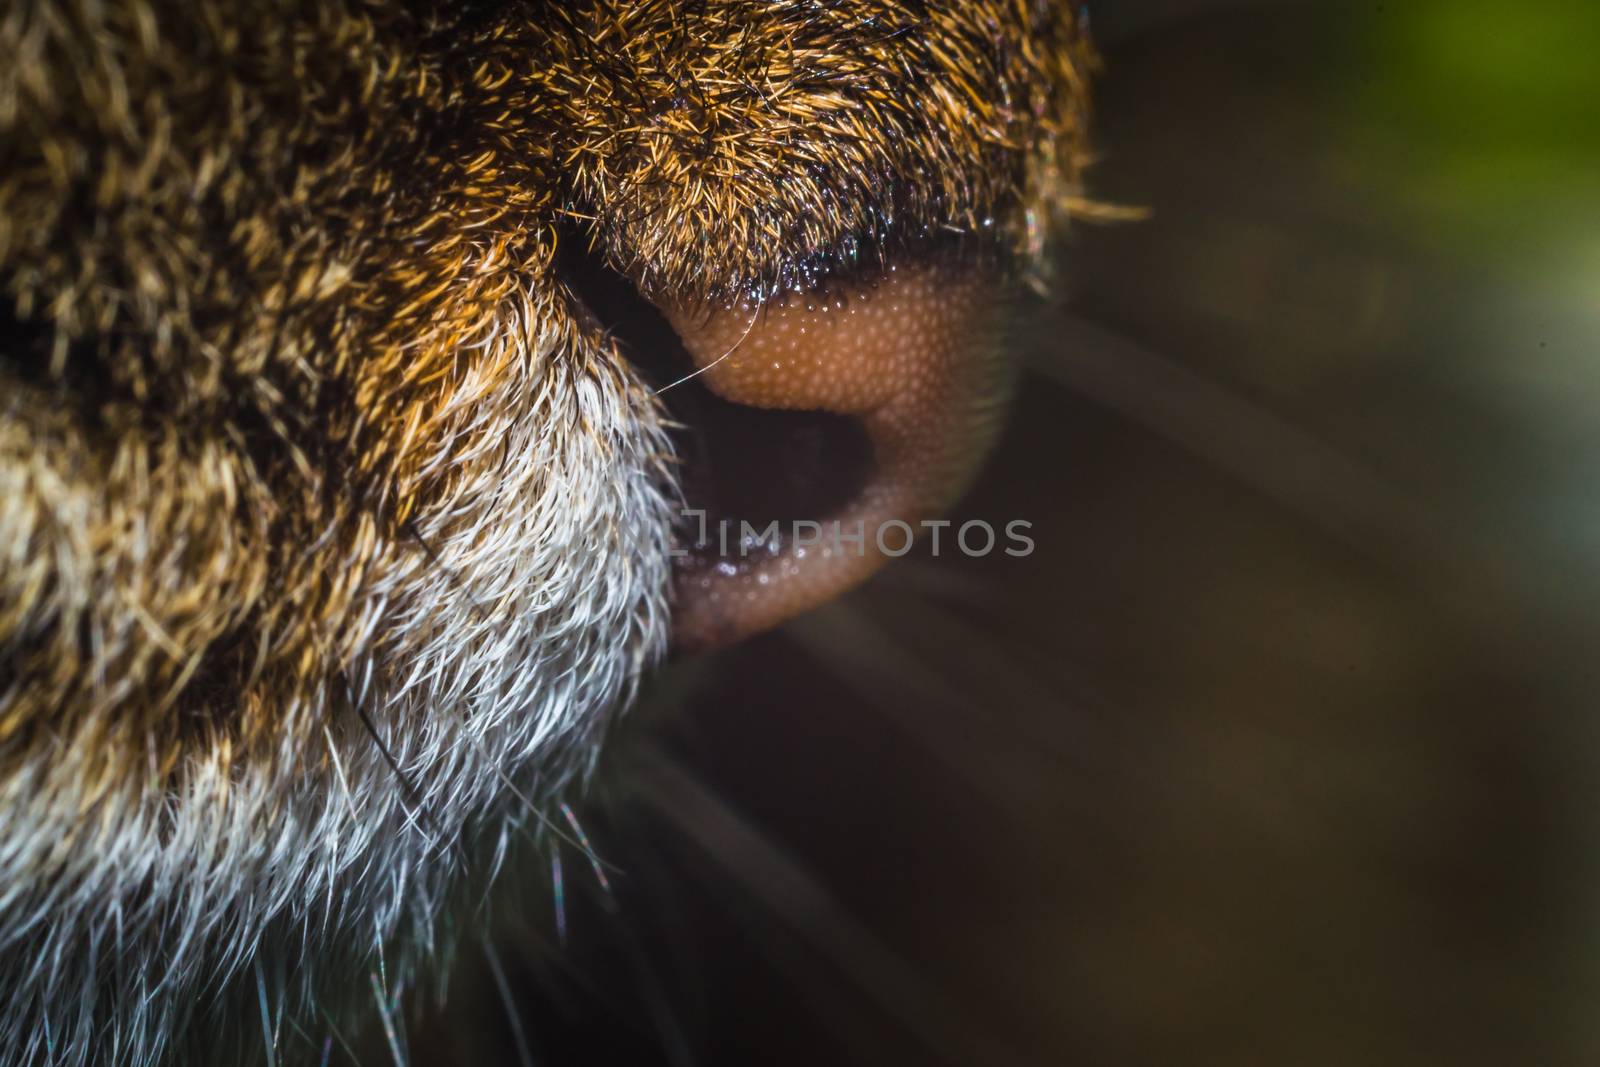 cat nose close-up by darksoul72